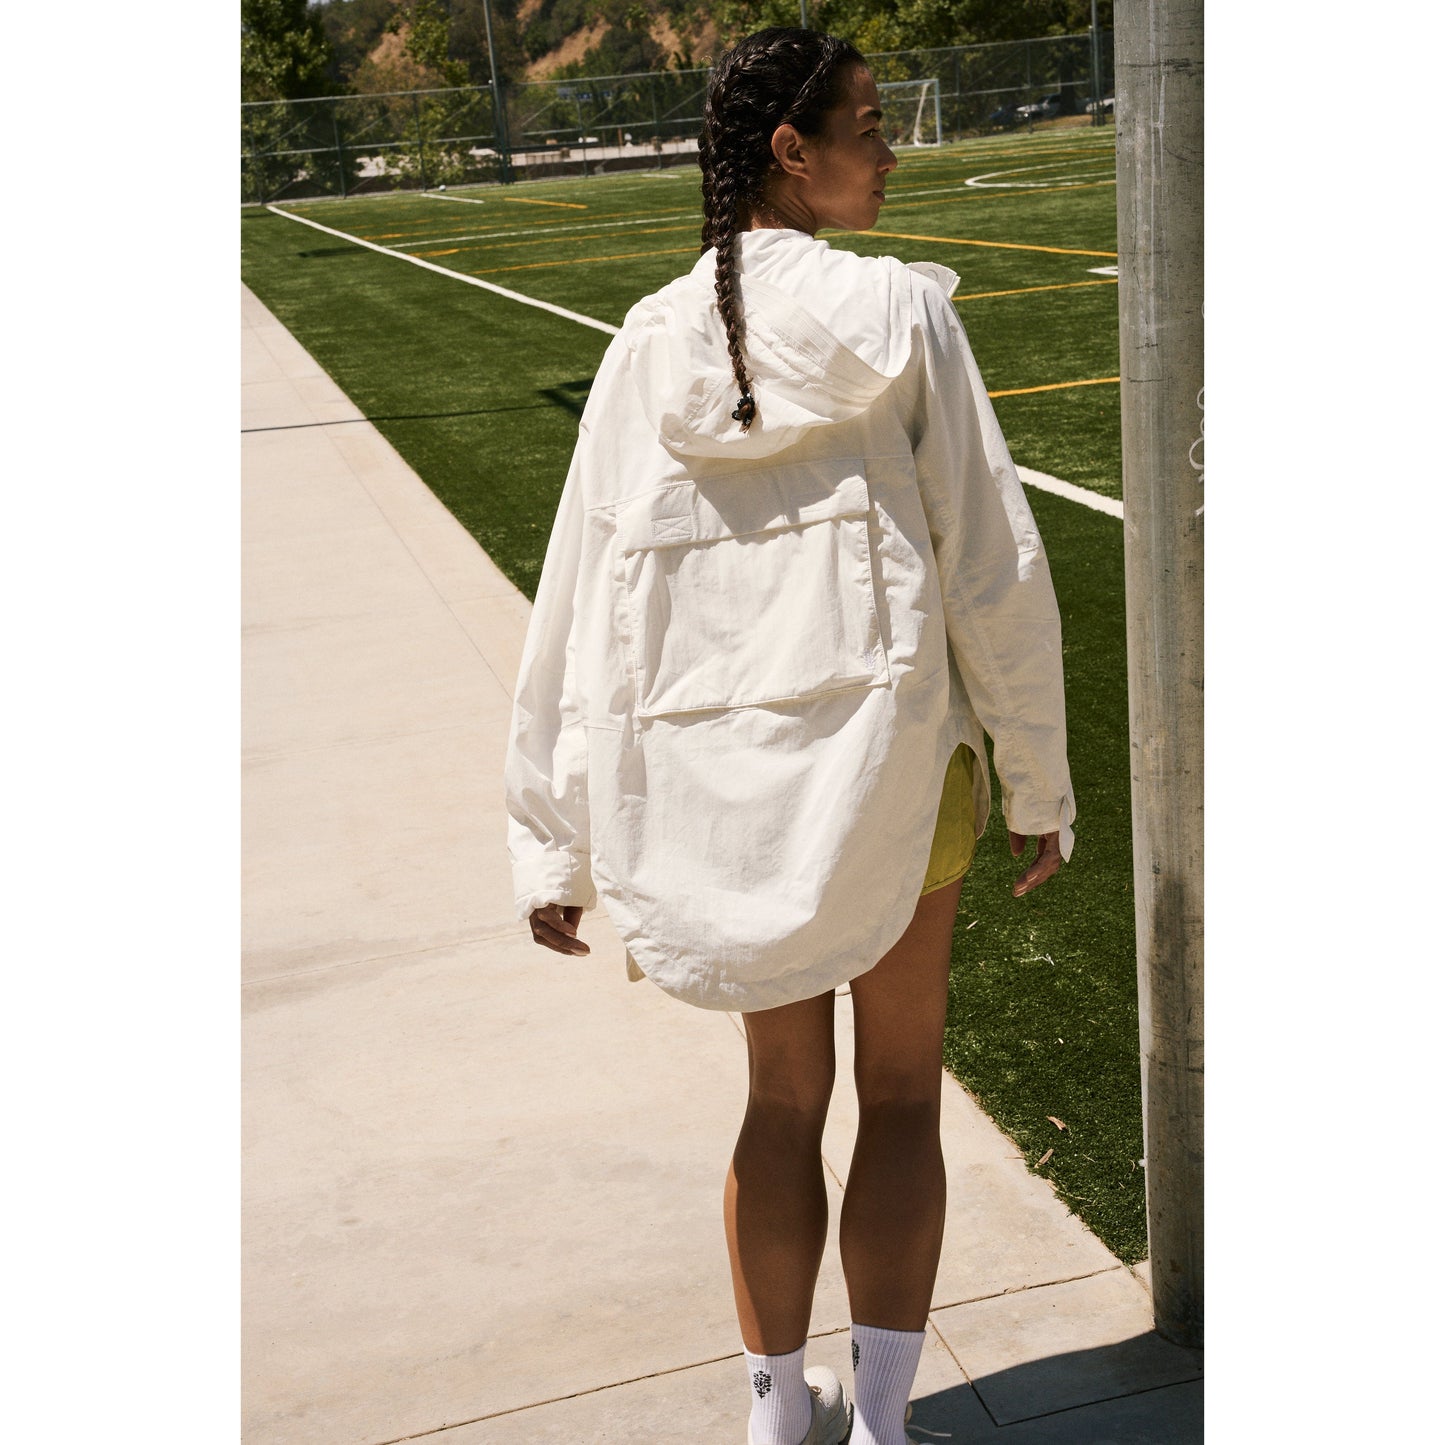 A woman in a Singin in the Rain Jacket by Free People Movement and yellow shorts standing by a pole on a sunny sports field, looking away from the camera.